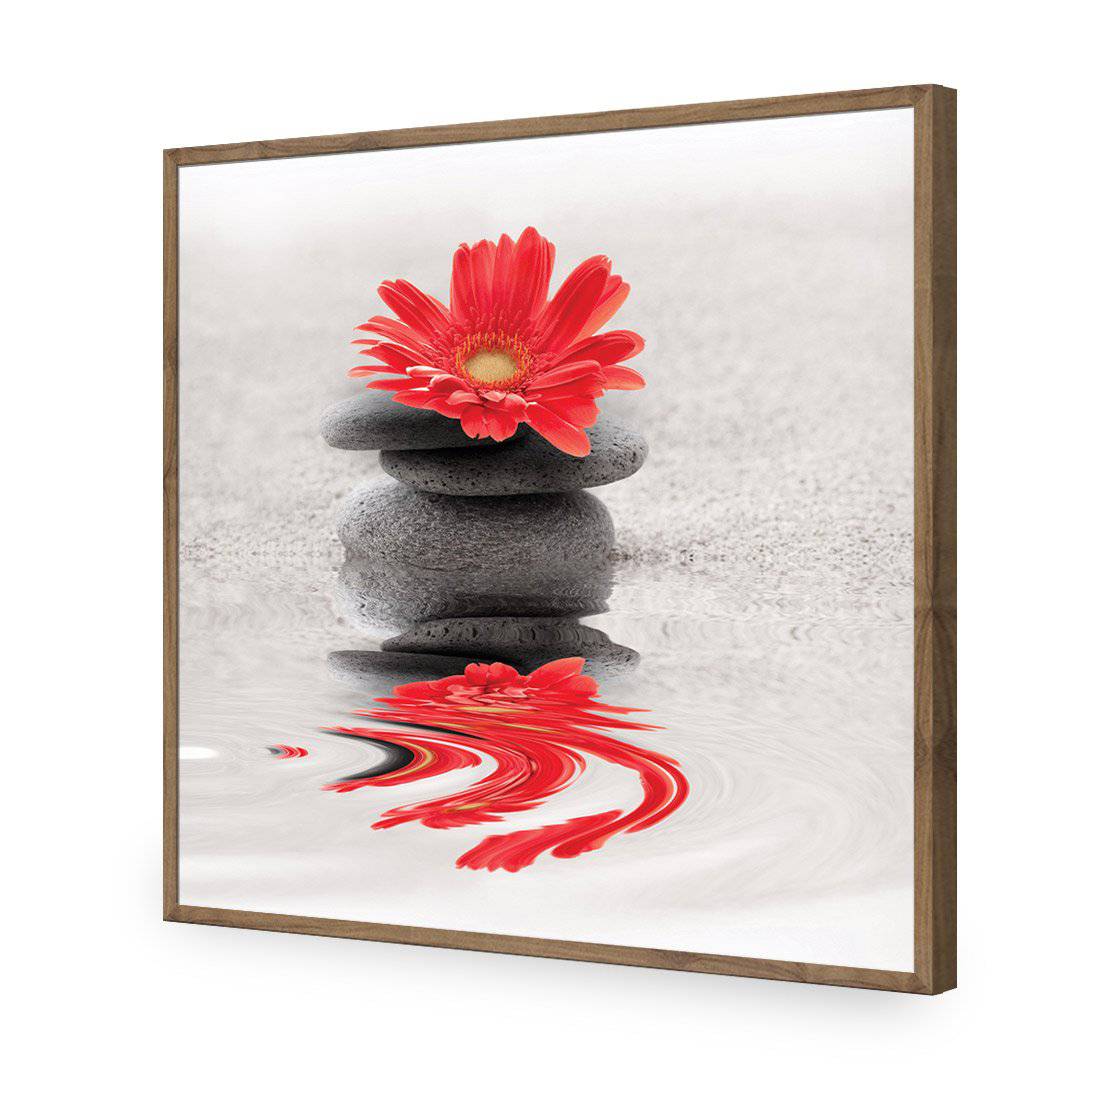 Red Flower Reflection, Square-Acrylic-Wall Art Design-Without Border-Acrylic - Natural Frame-37x37cm-Wall Art Designs